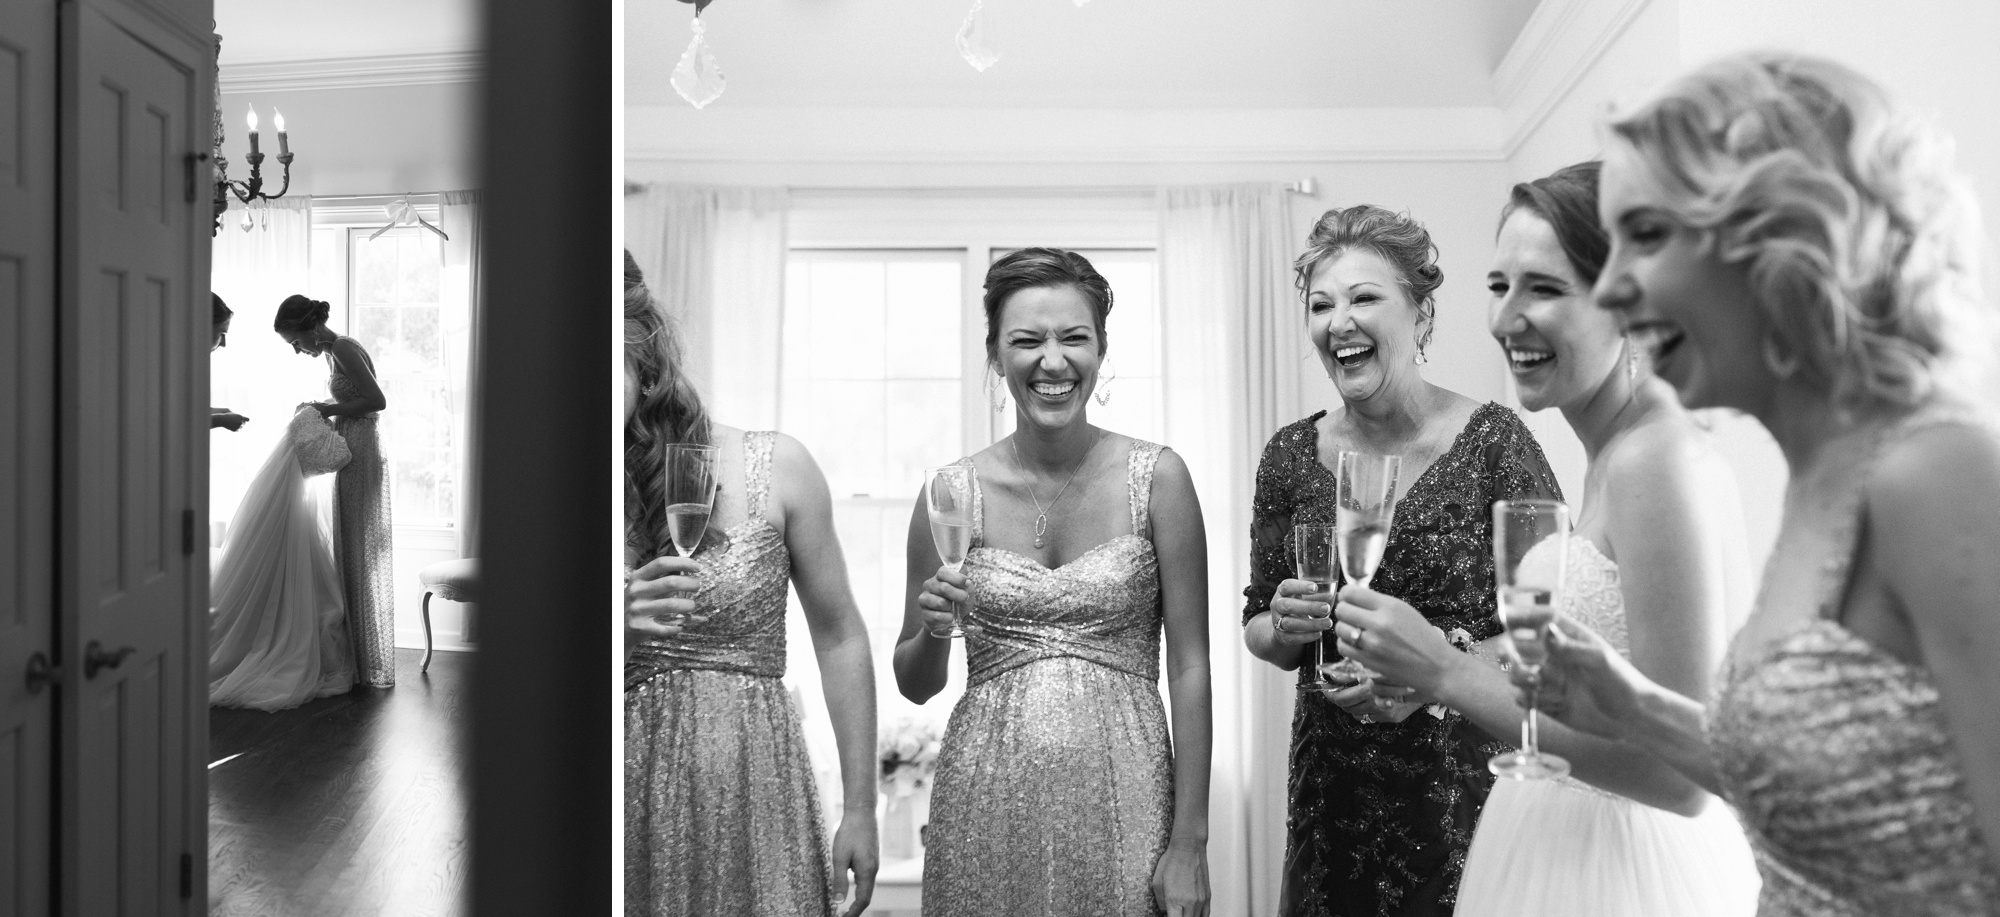 This bride takes a minute to relax with her ladies before her first look.